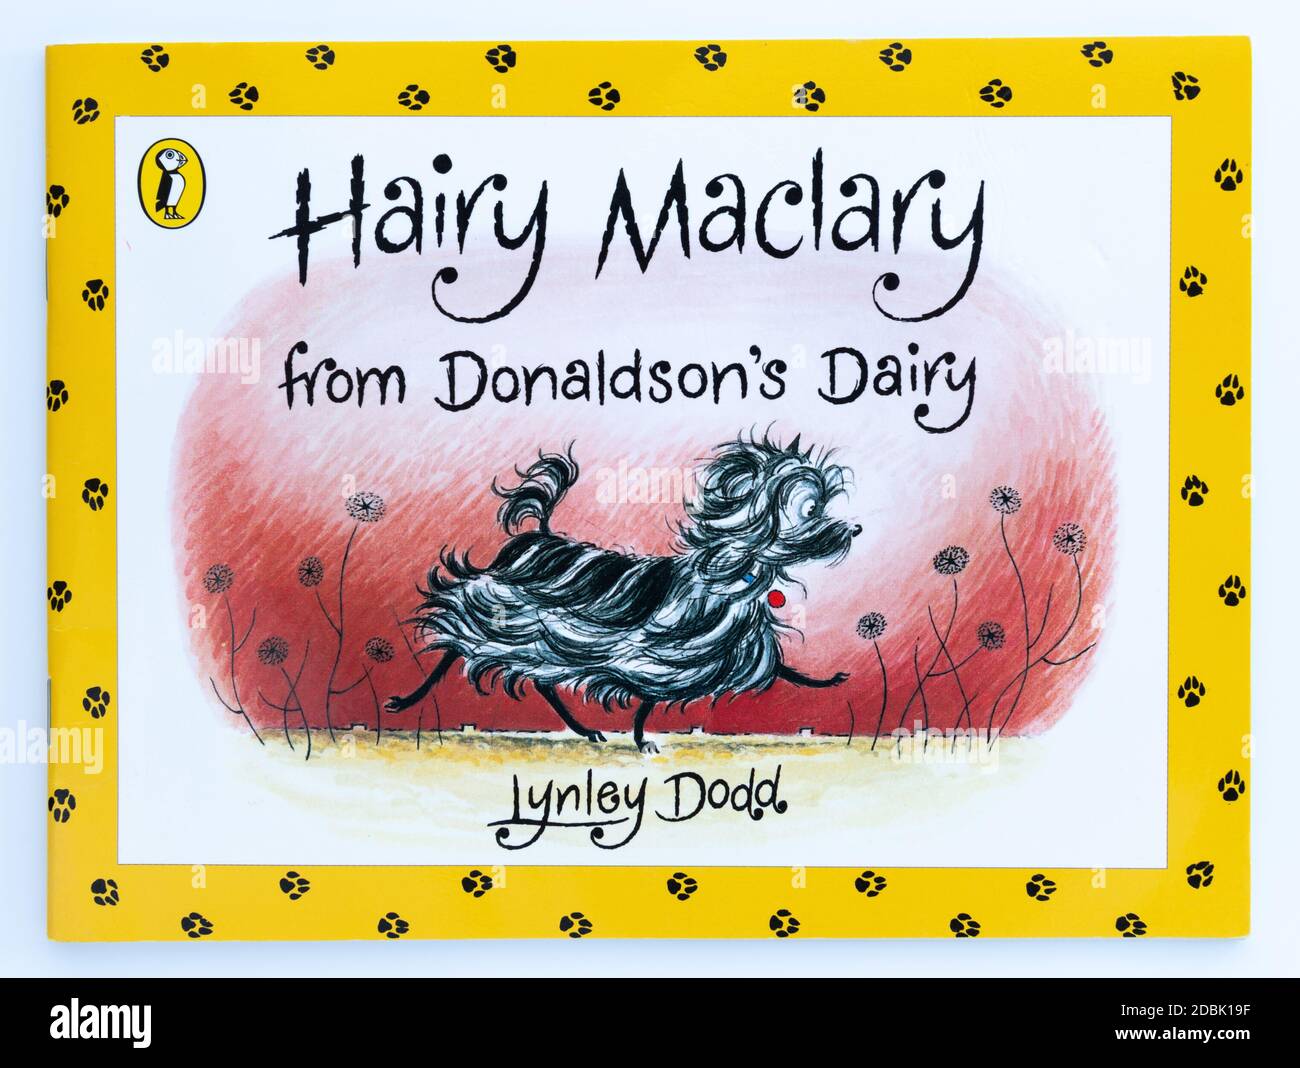 Hairy Maclary de Donaldson's Dairy - Lynley Dodd Banque D'Images